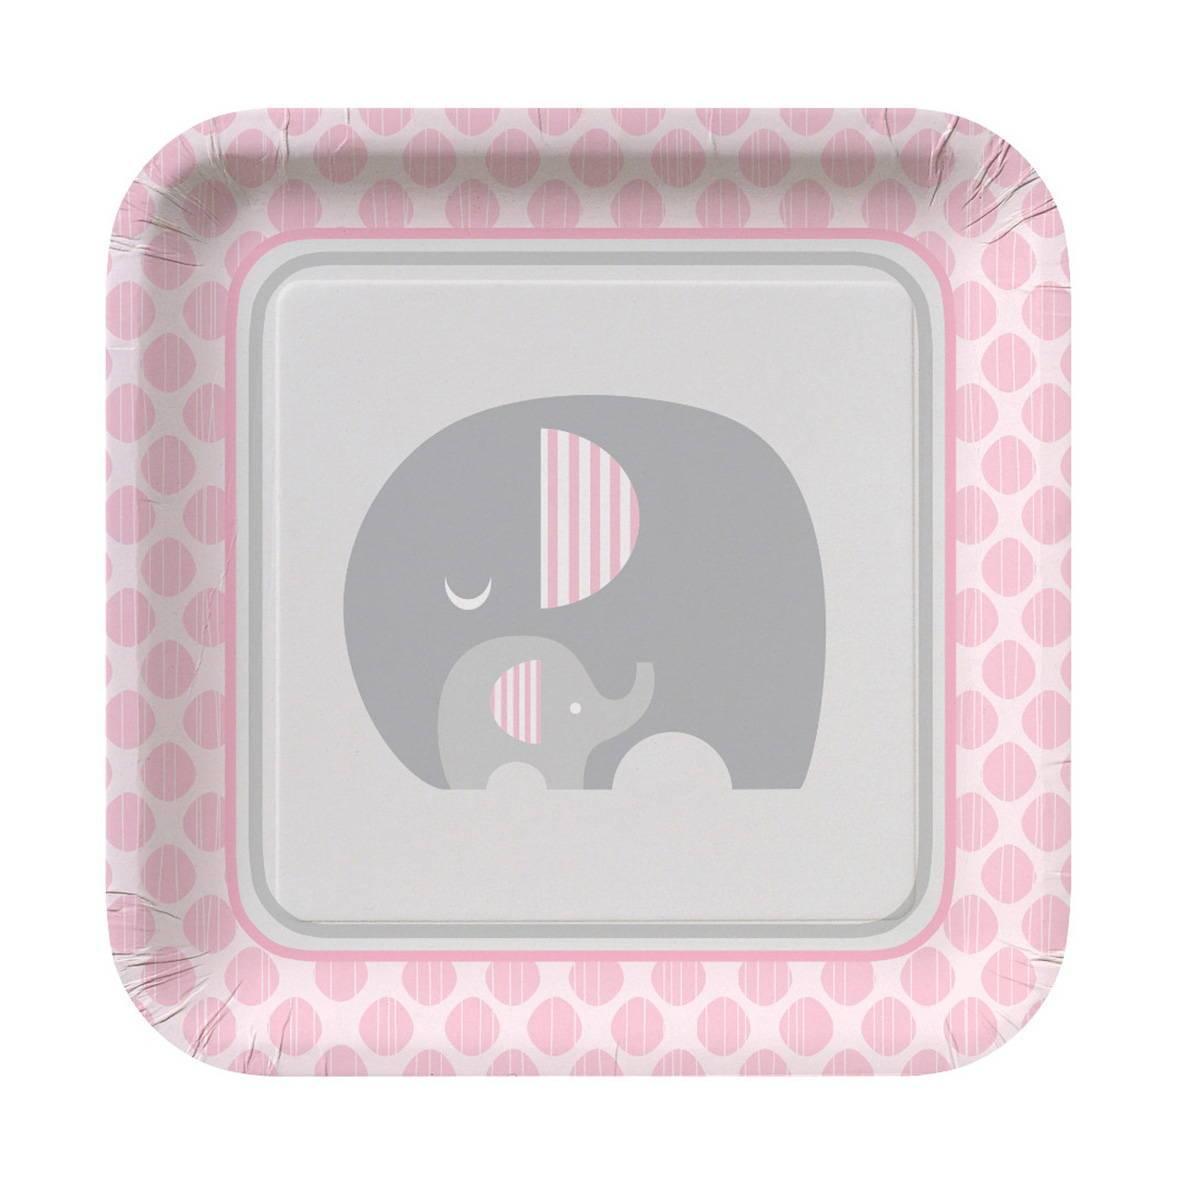 Buy Baby Shower Little Peanut Pink paper plates 9 inches, 8 per package sold at Party Expert